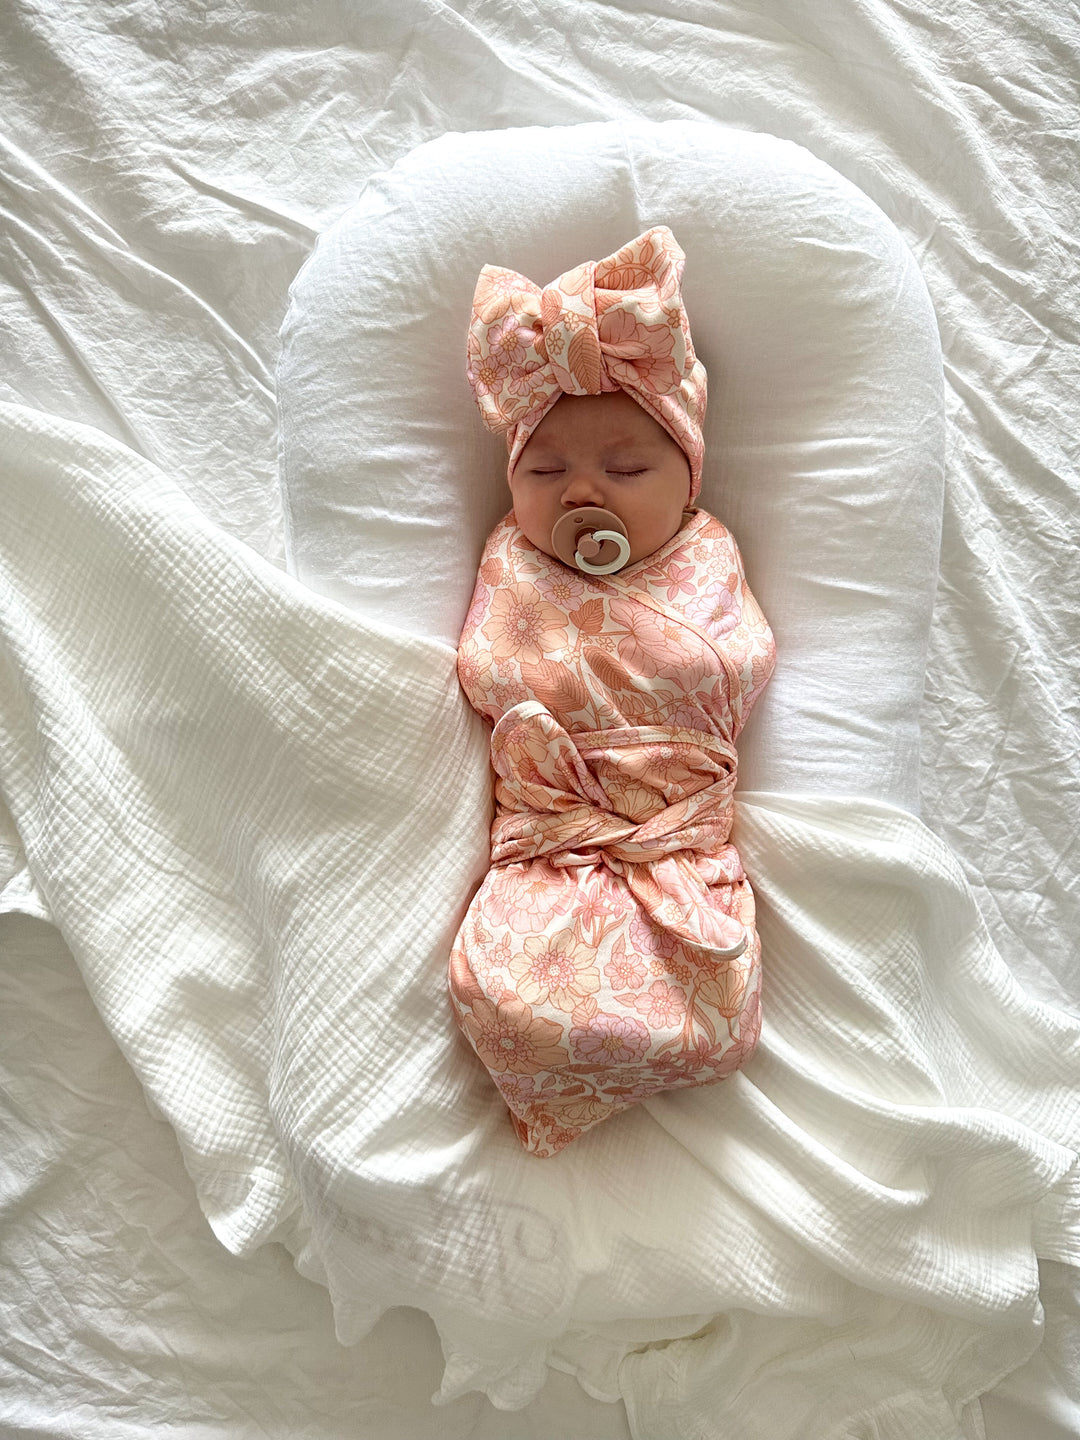 Matching Bows, Swaddles + Bedding